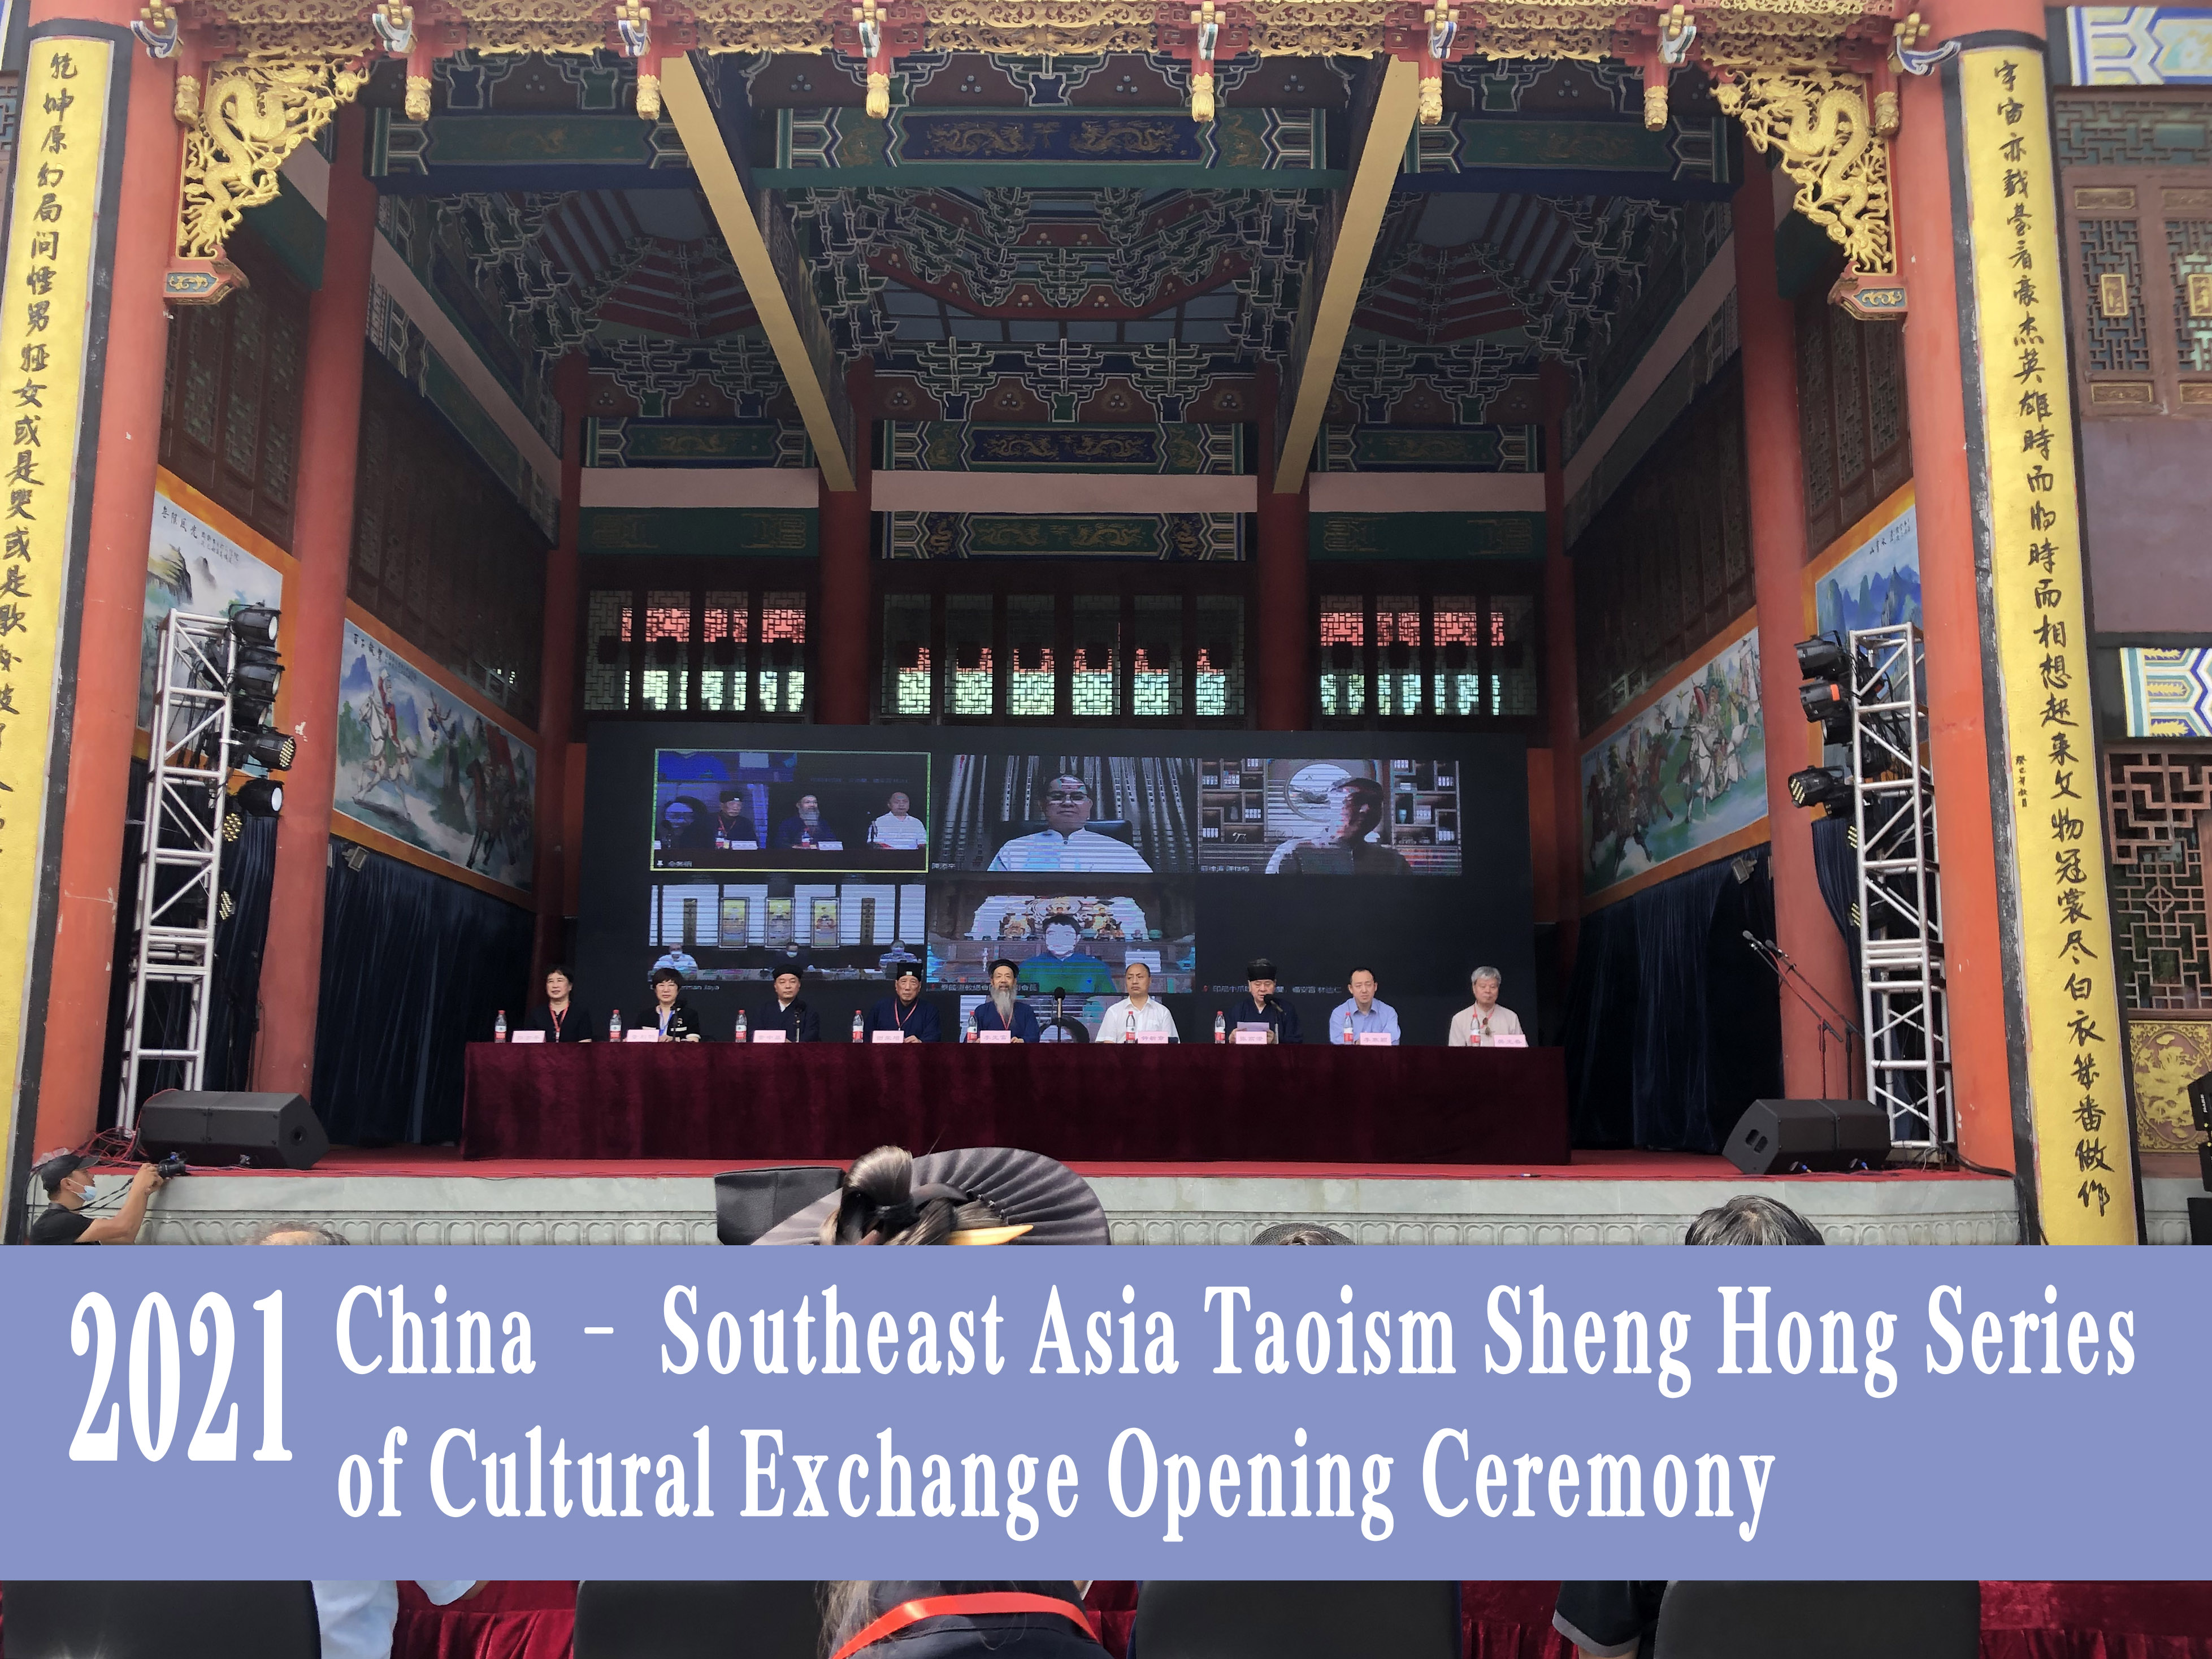 2021 China – Southeast Asia Taoism Sheng Hong Series of Cultural Exchange Opening Ceremony